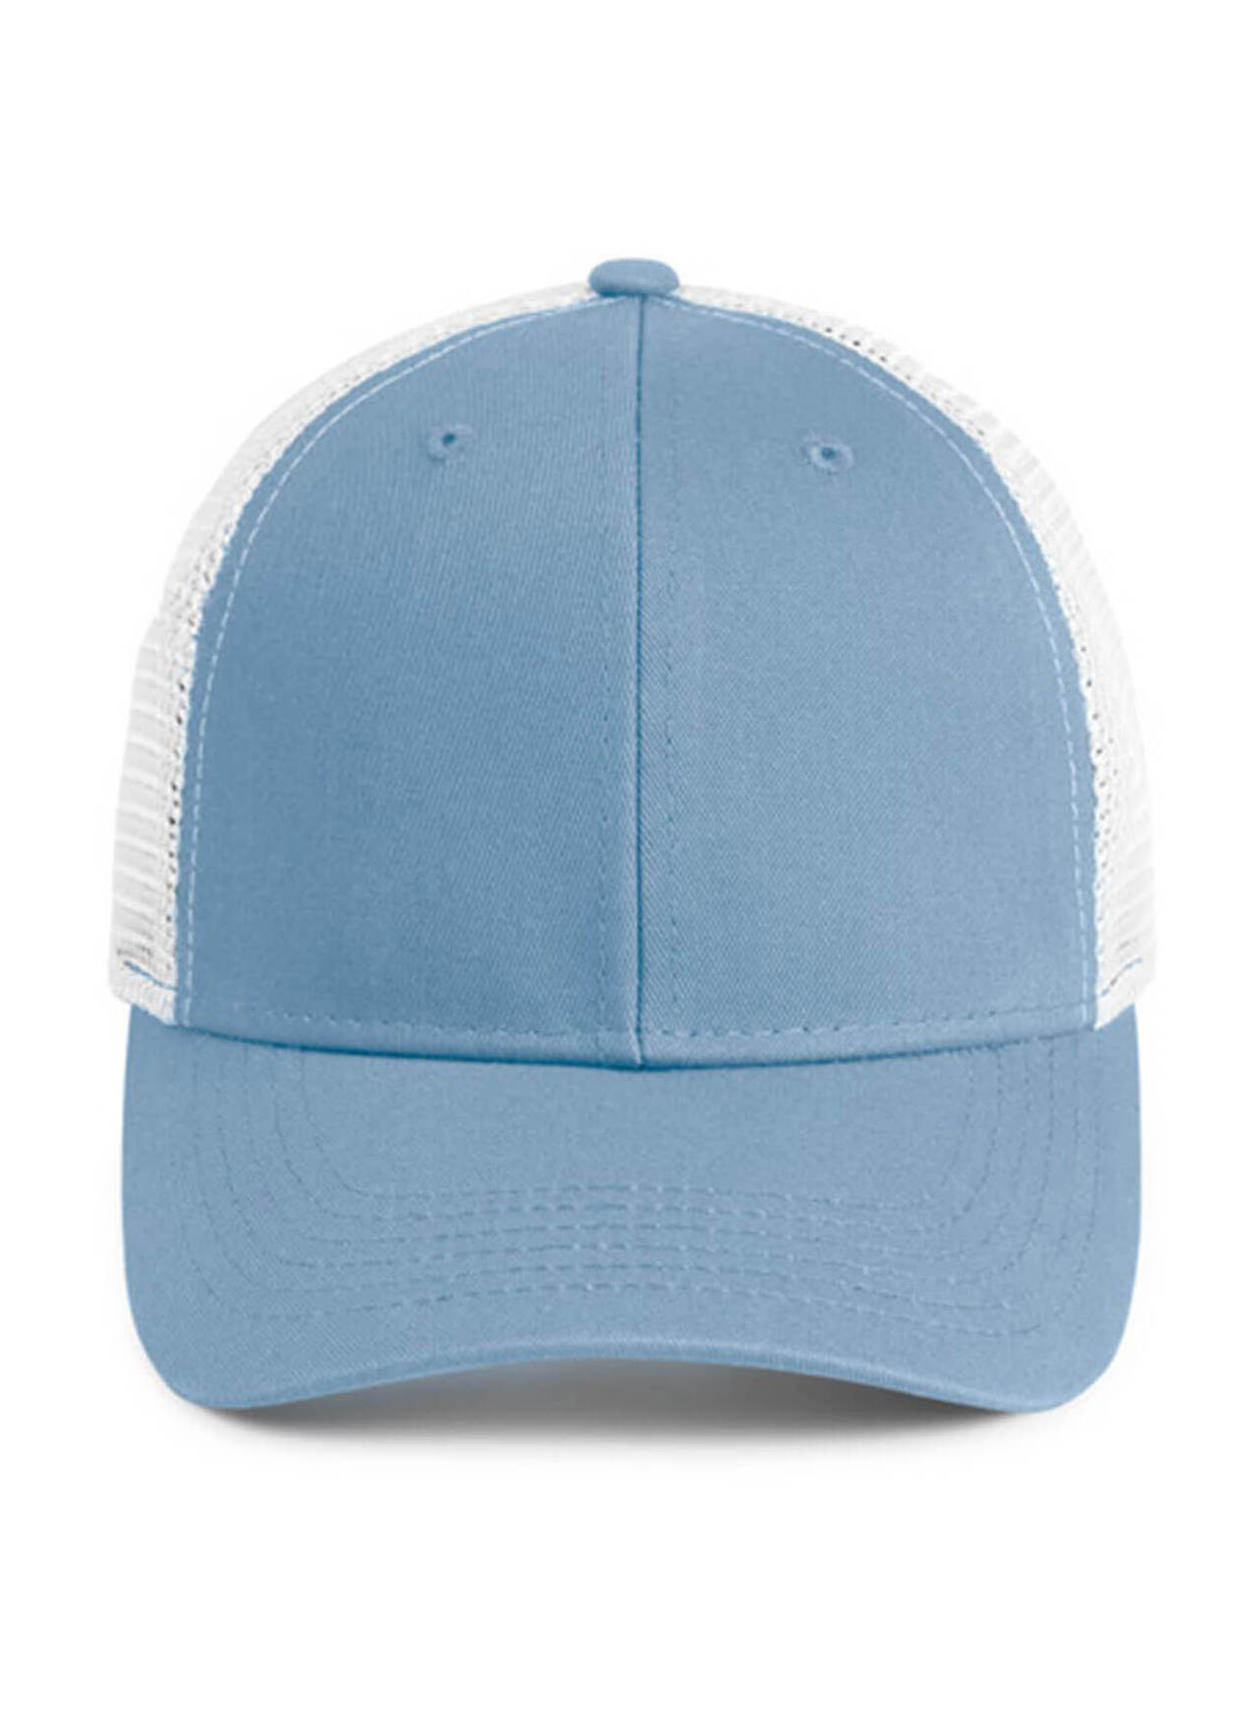 Imperial Light Blue / White The Catch & Release Hat Adjustable Meshback Hat